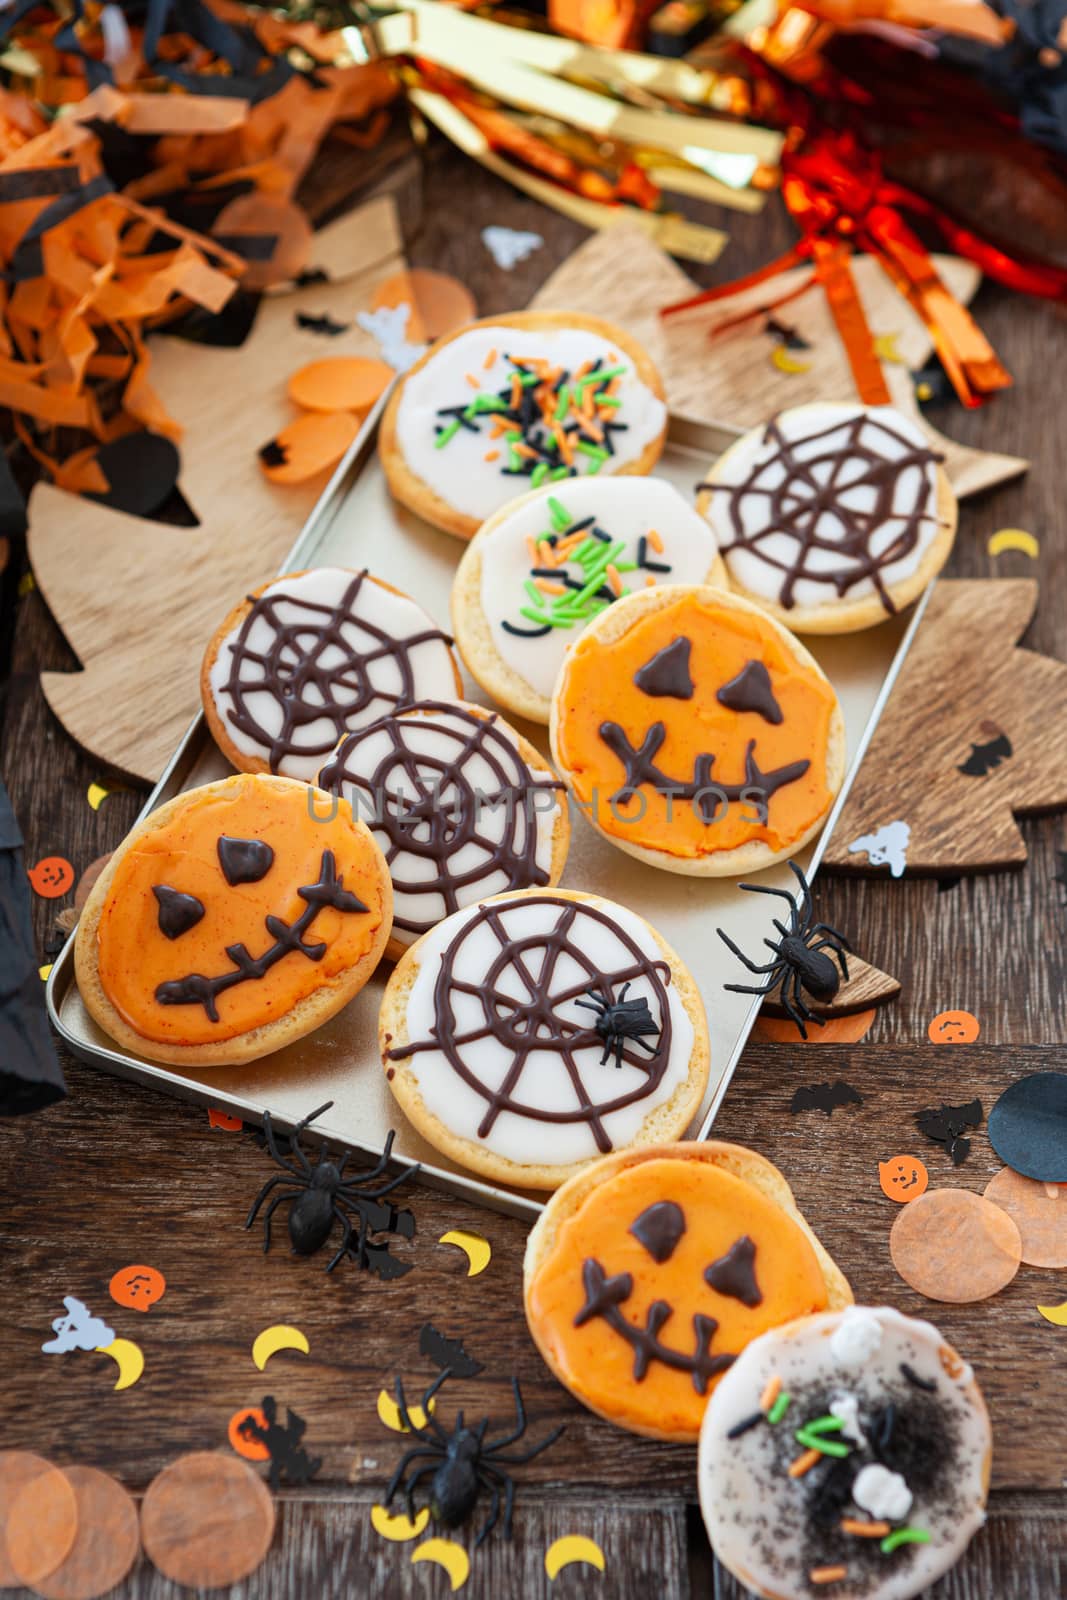 Colorful cookies for Halloween by BarbaraNeveu